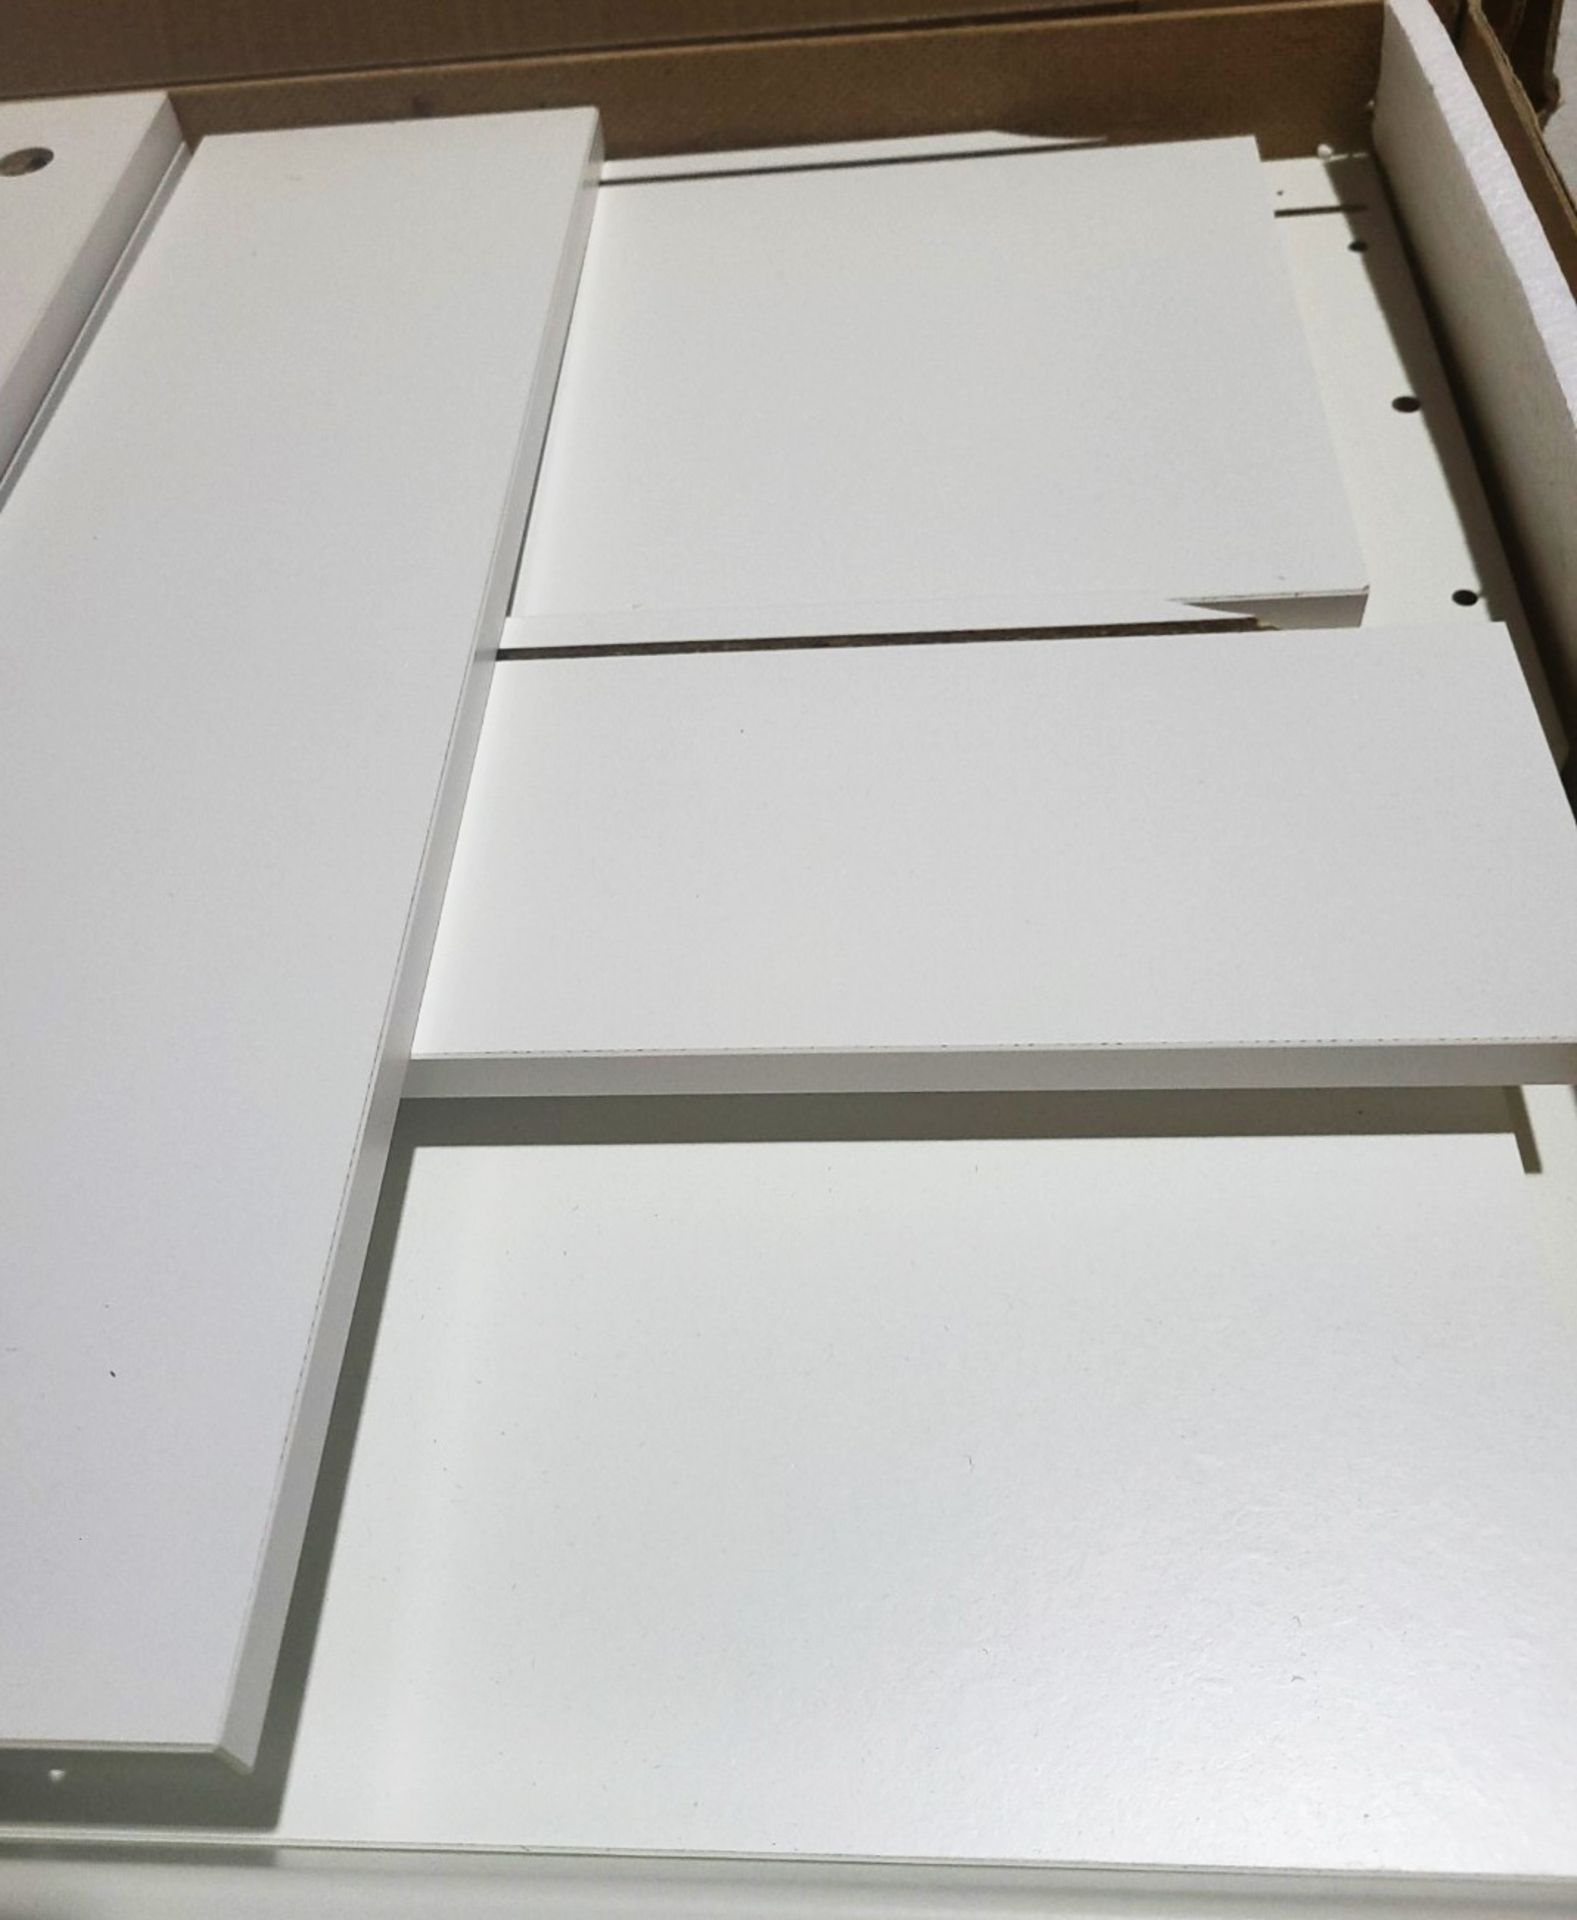 1 x STOKKE White Three Drawer Beechwood And MDF Home Dresser *Comes In 2 Boxes - Image 5 of 5